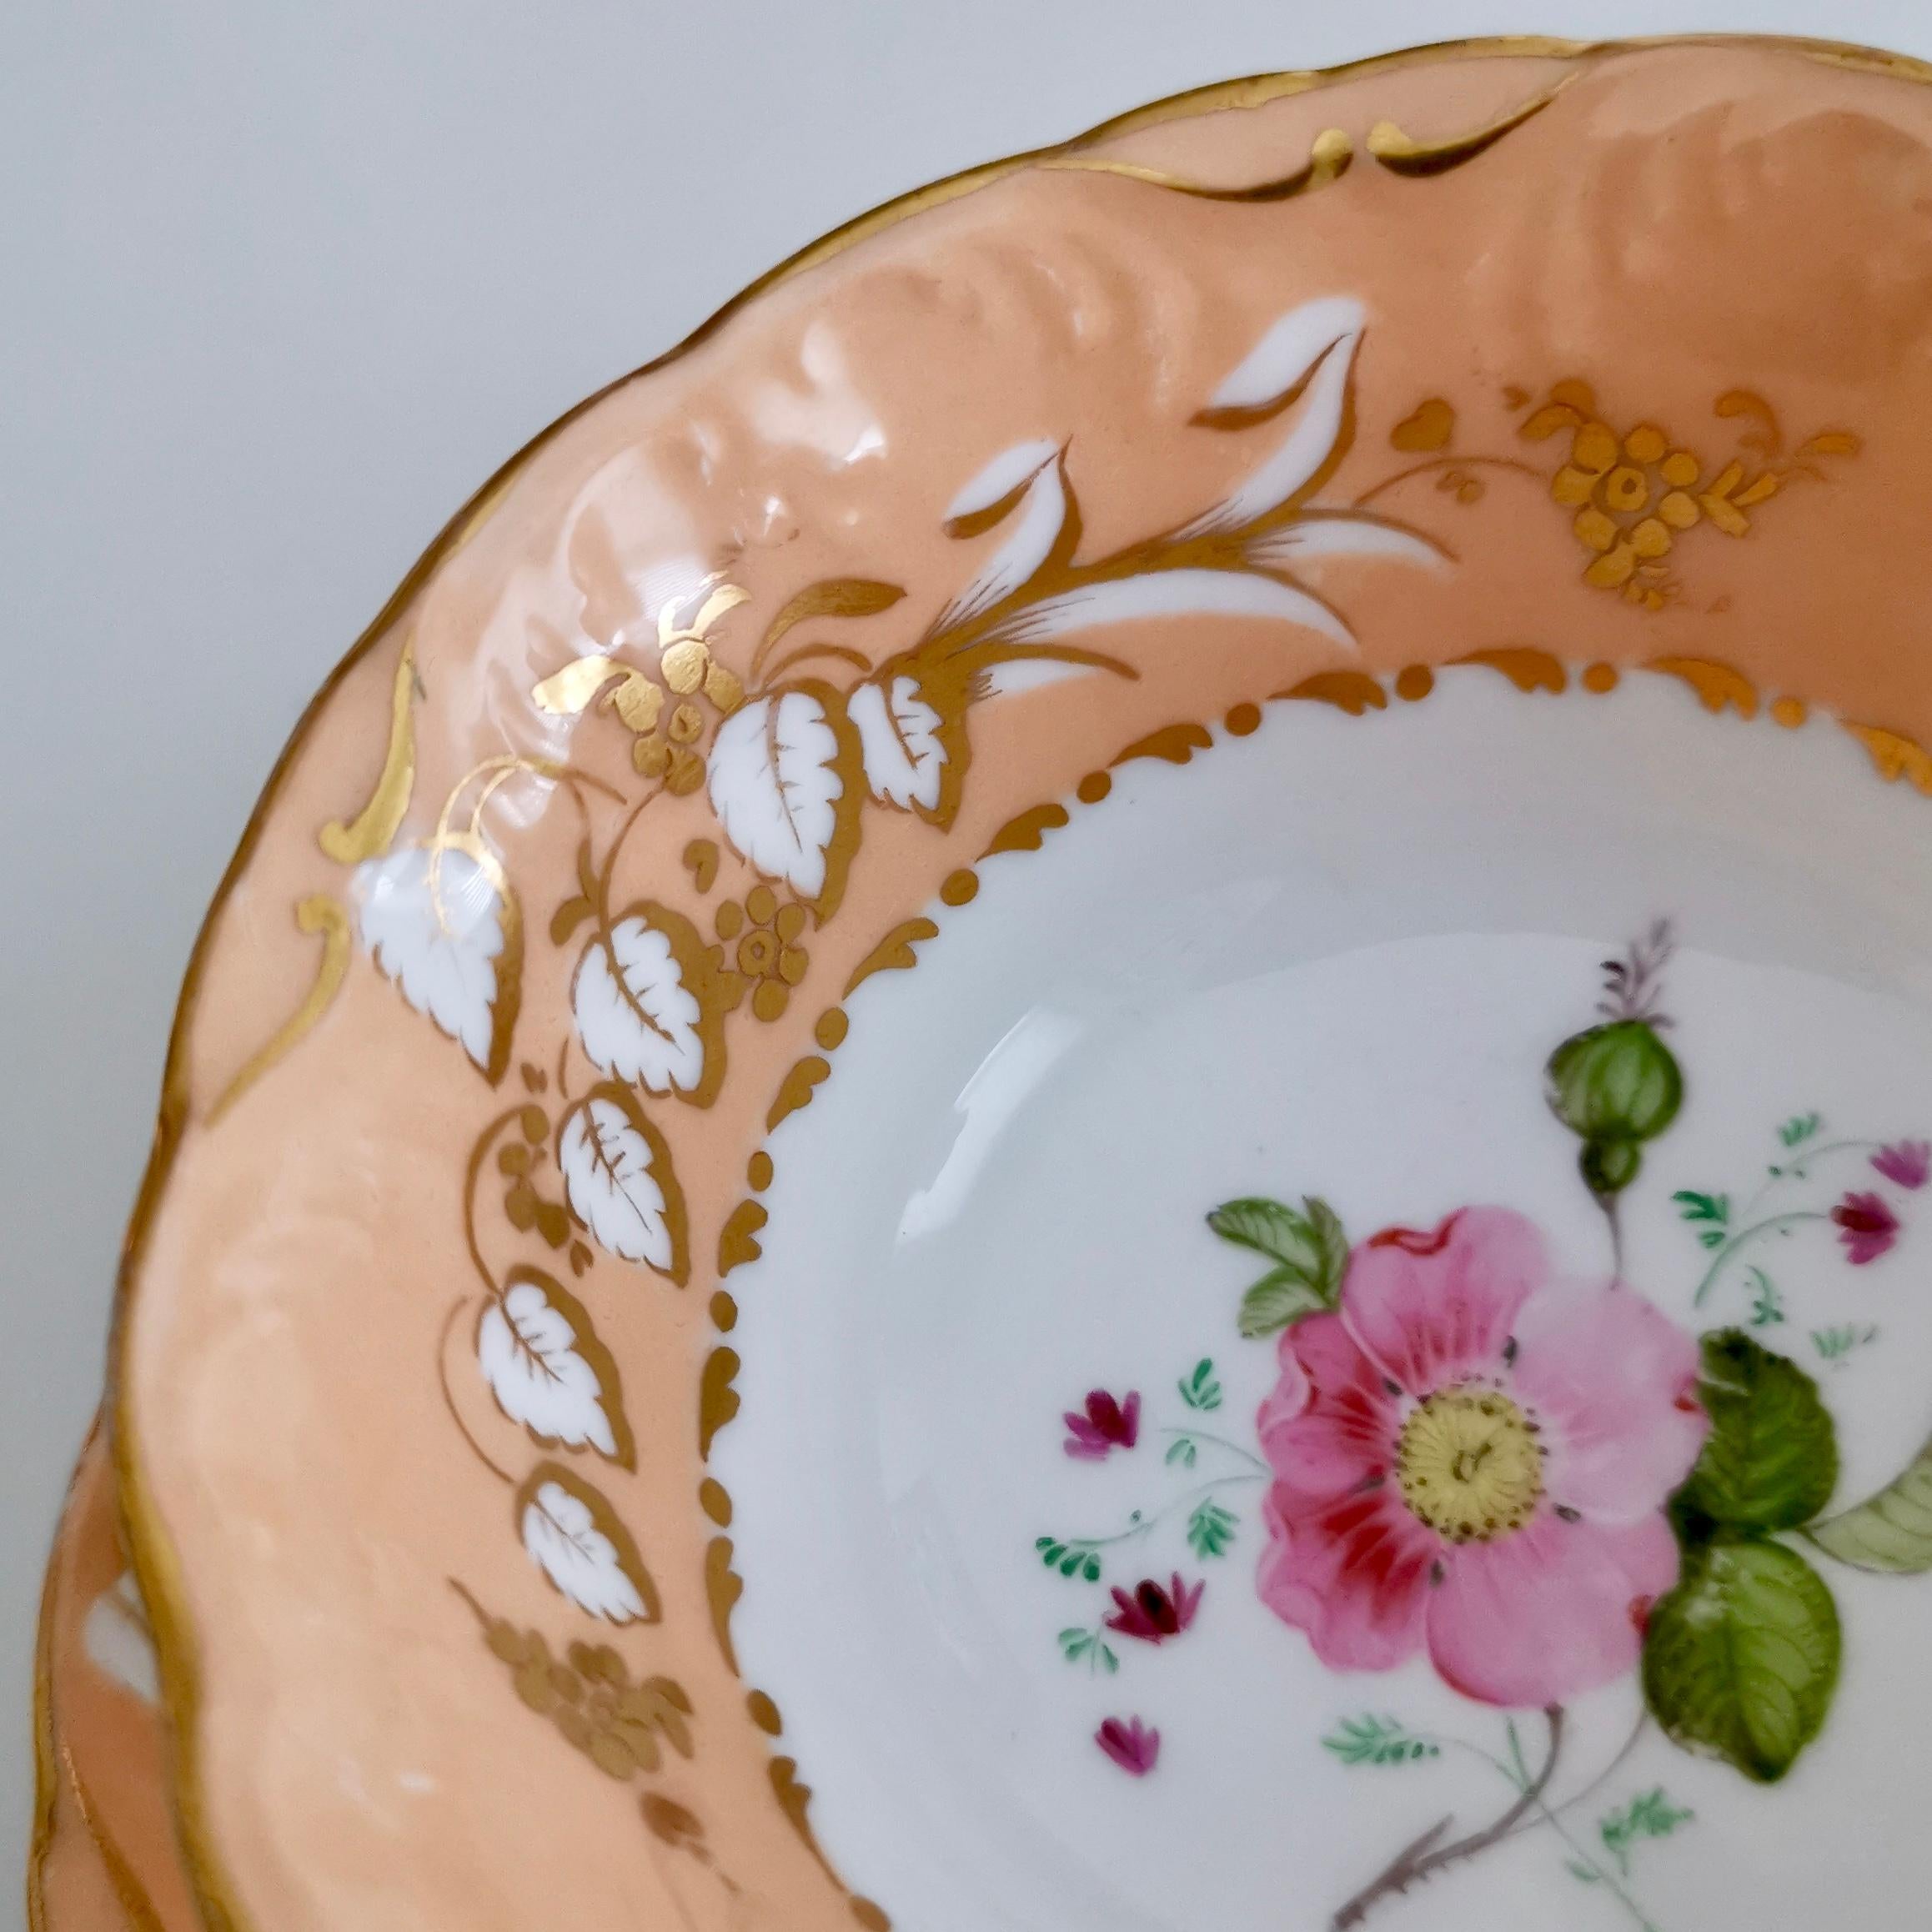 Porcelain Coalport Teacup, Adelaide Shape, Peach-Colored with Roses, circa 1839